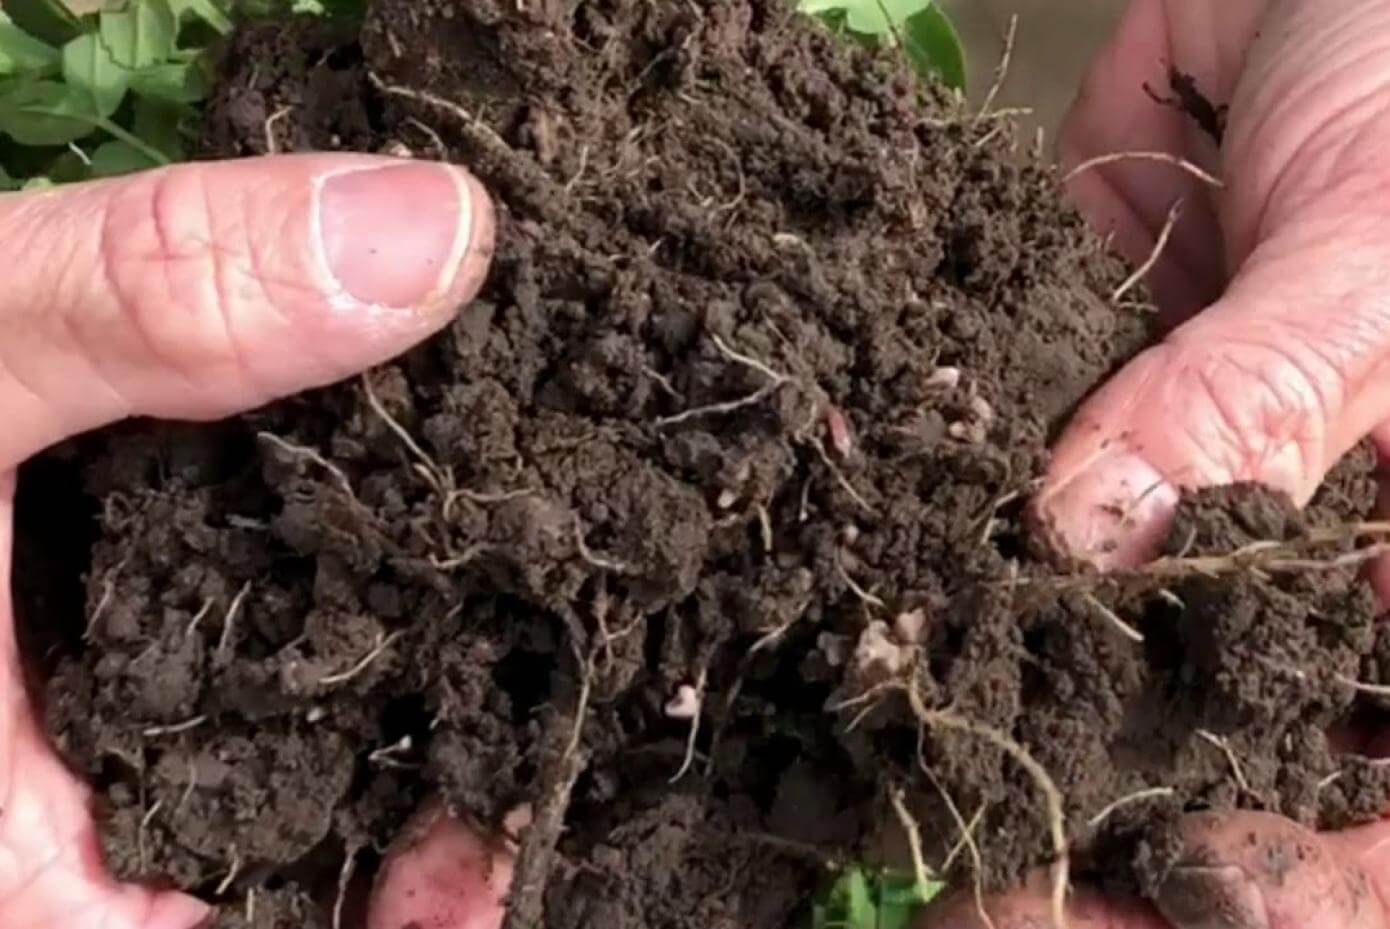 Winter pea roots showing nodulation